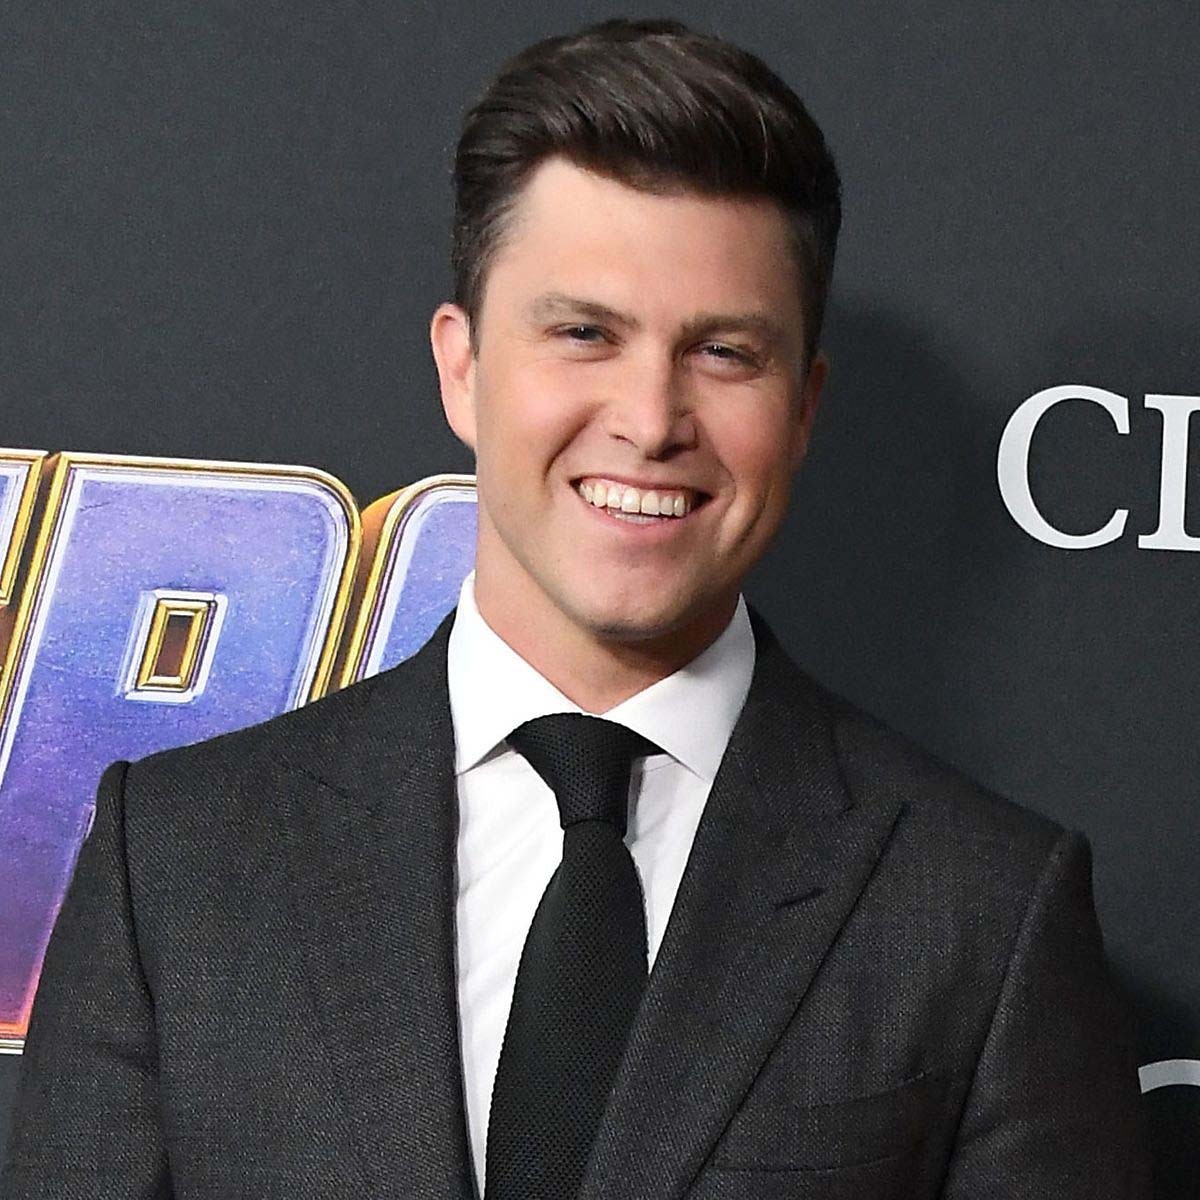 Saturday Night Live head writer Colin Jost wants to part with his longtime bachelor pad. https://t.co/vVBzLsYYUm https://t.co/fSQAFBoaCb